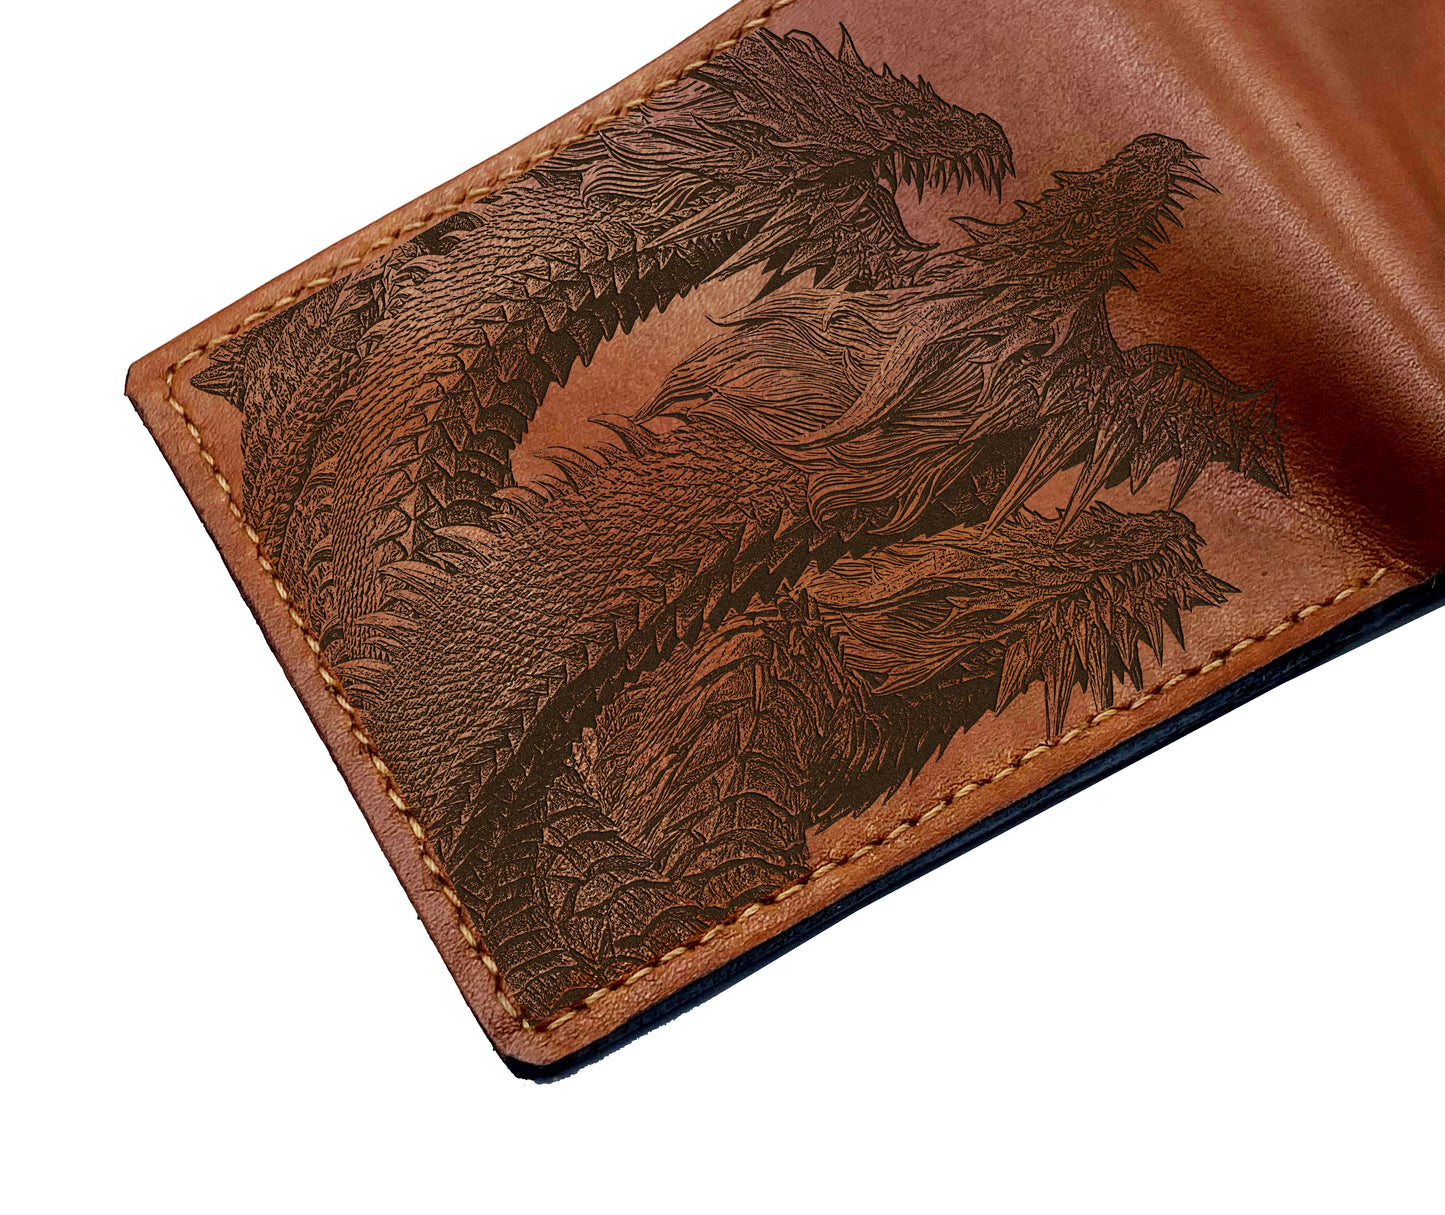 Godzilla King Ghidorah drawing leather wallet, custom engraving gift ideas, monsters art wallet, gift for brother, husband, monsterverse present